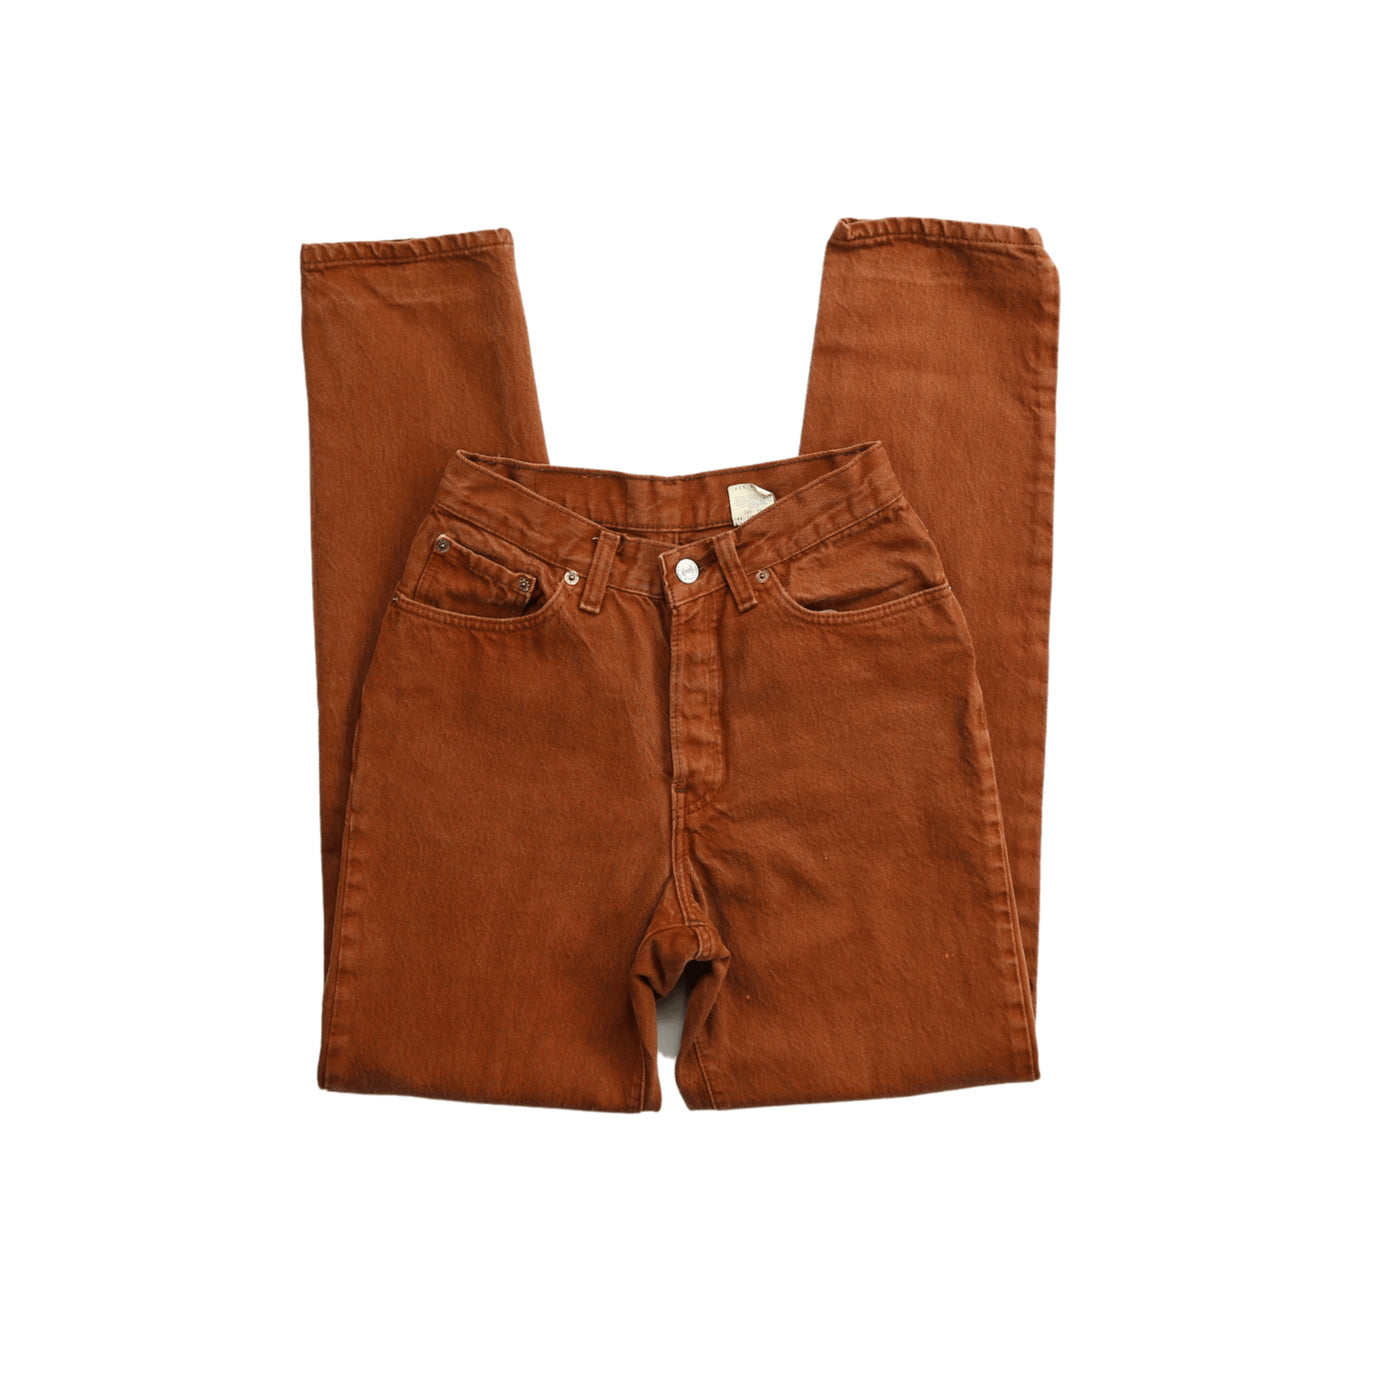 Vintage Levis 501 Brown Rust High Waisted Jeans